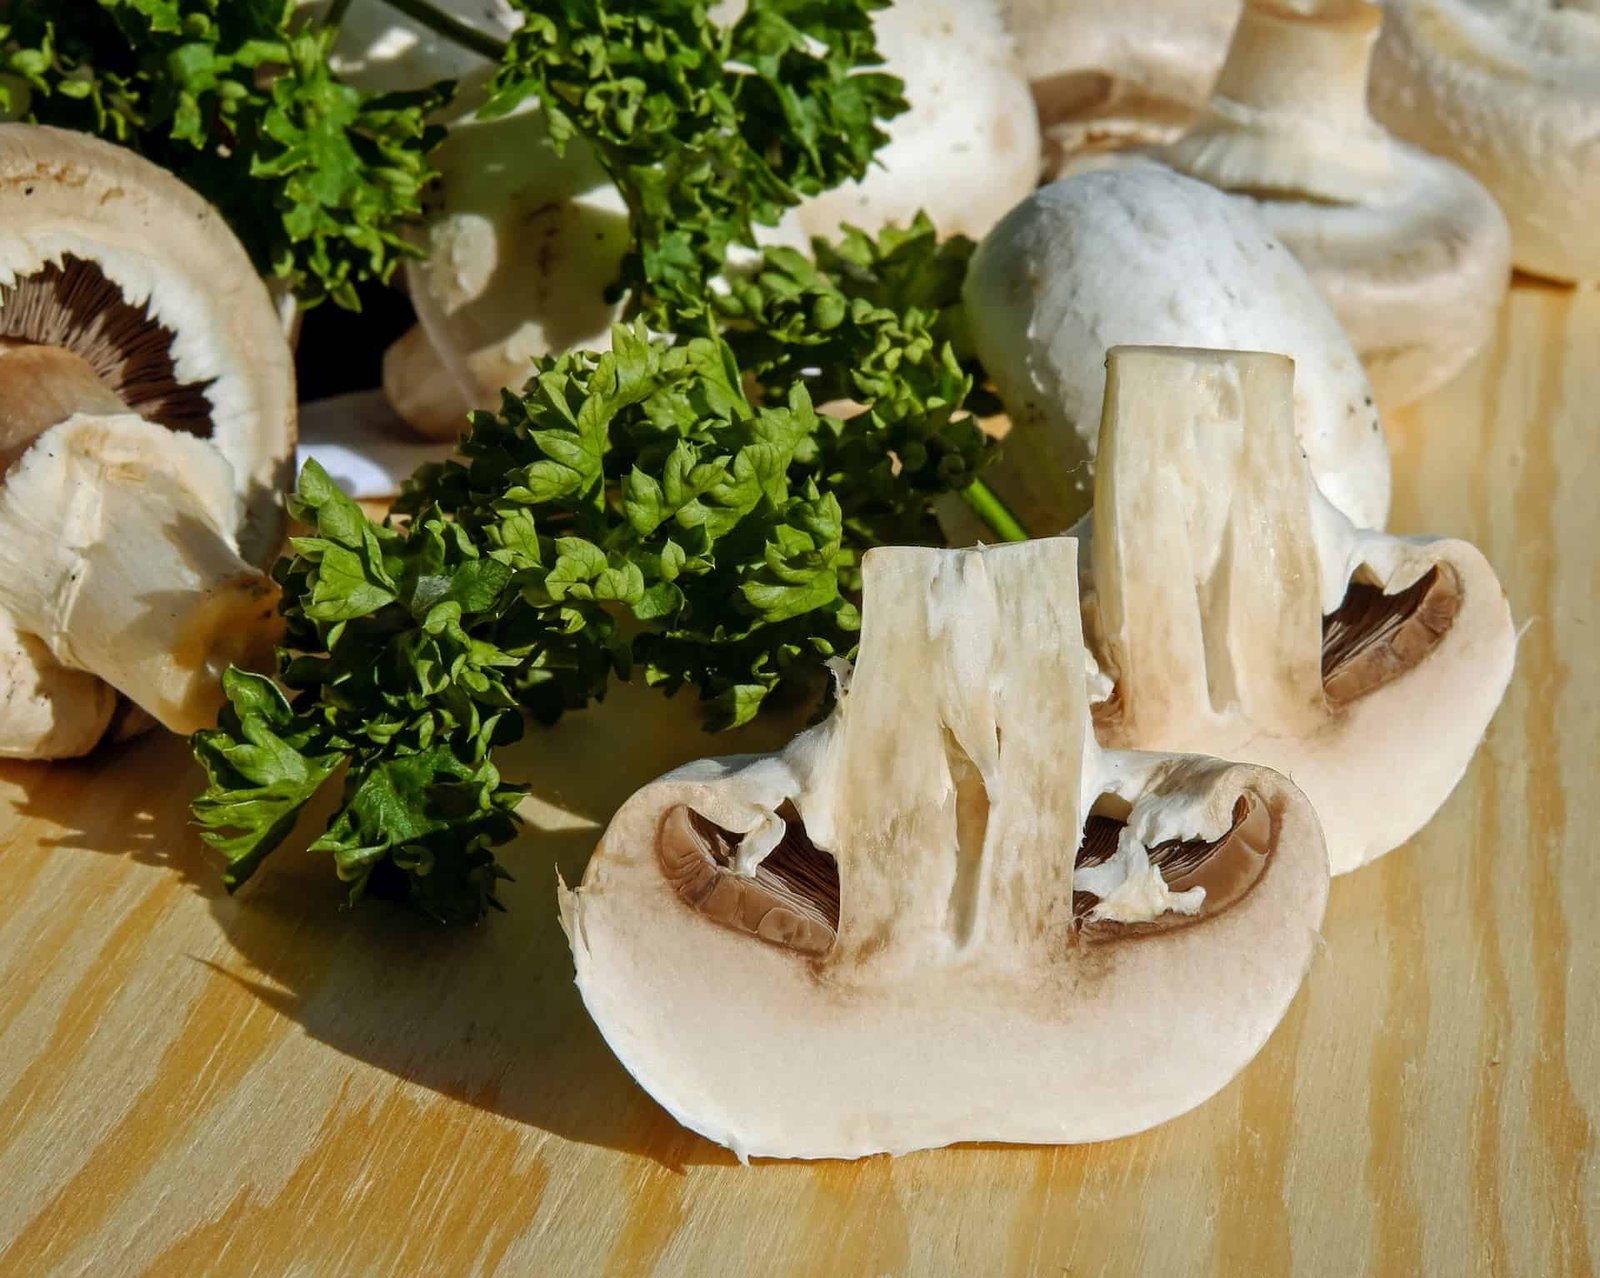 sliced mushroom with whole mushrooms and herb on a wooden backdrop